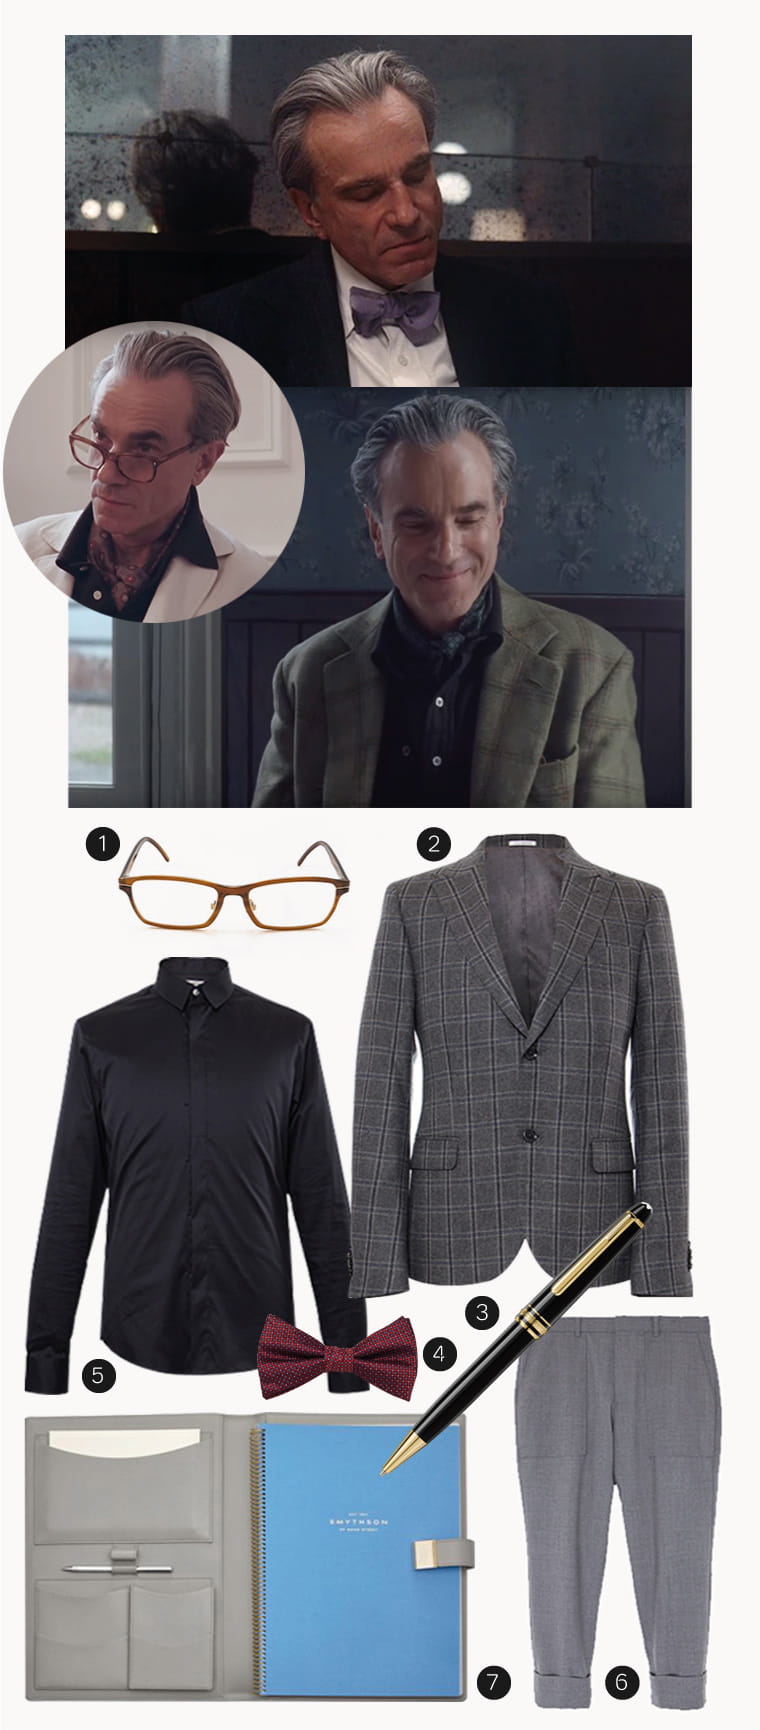 Here’s our pick of Phantom Thread style – with a modern update, of course